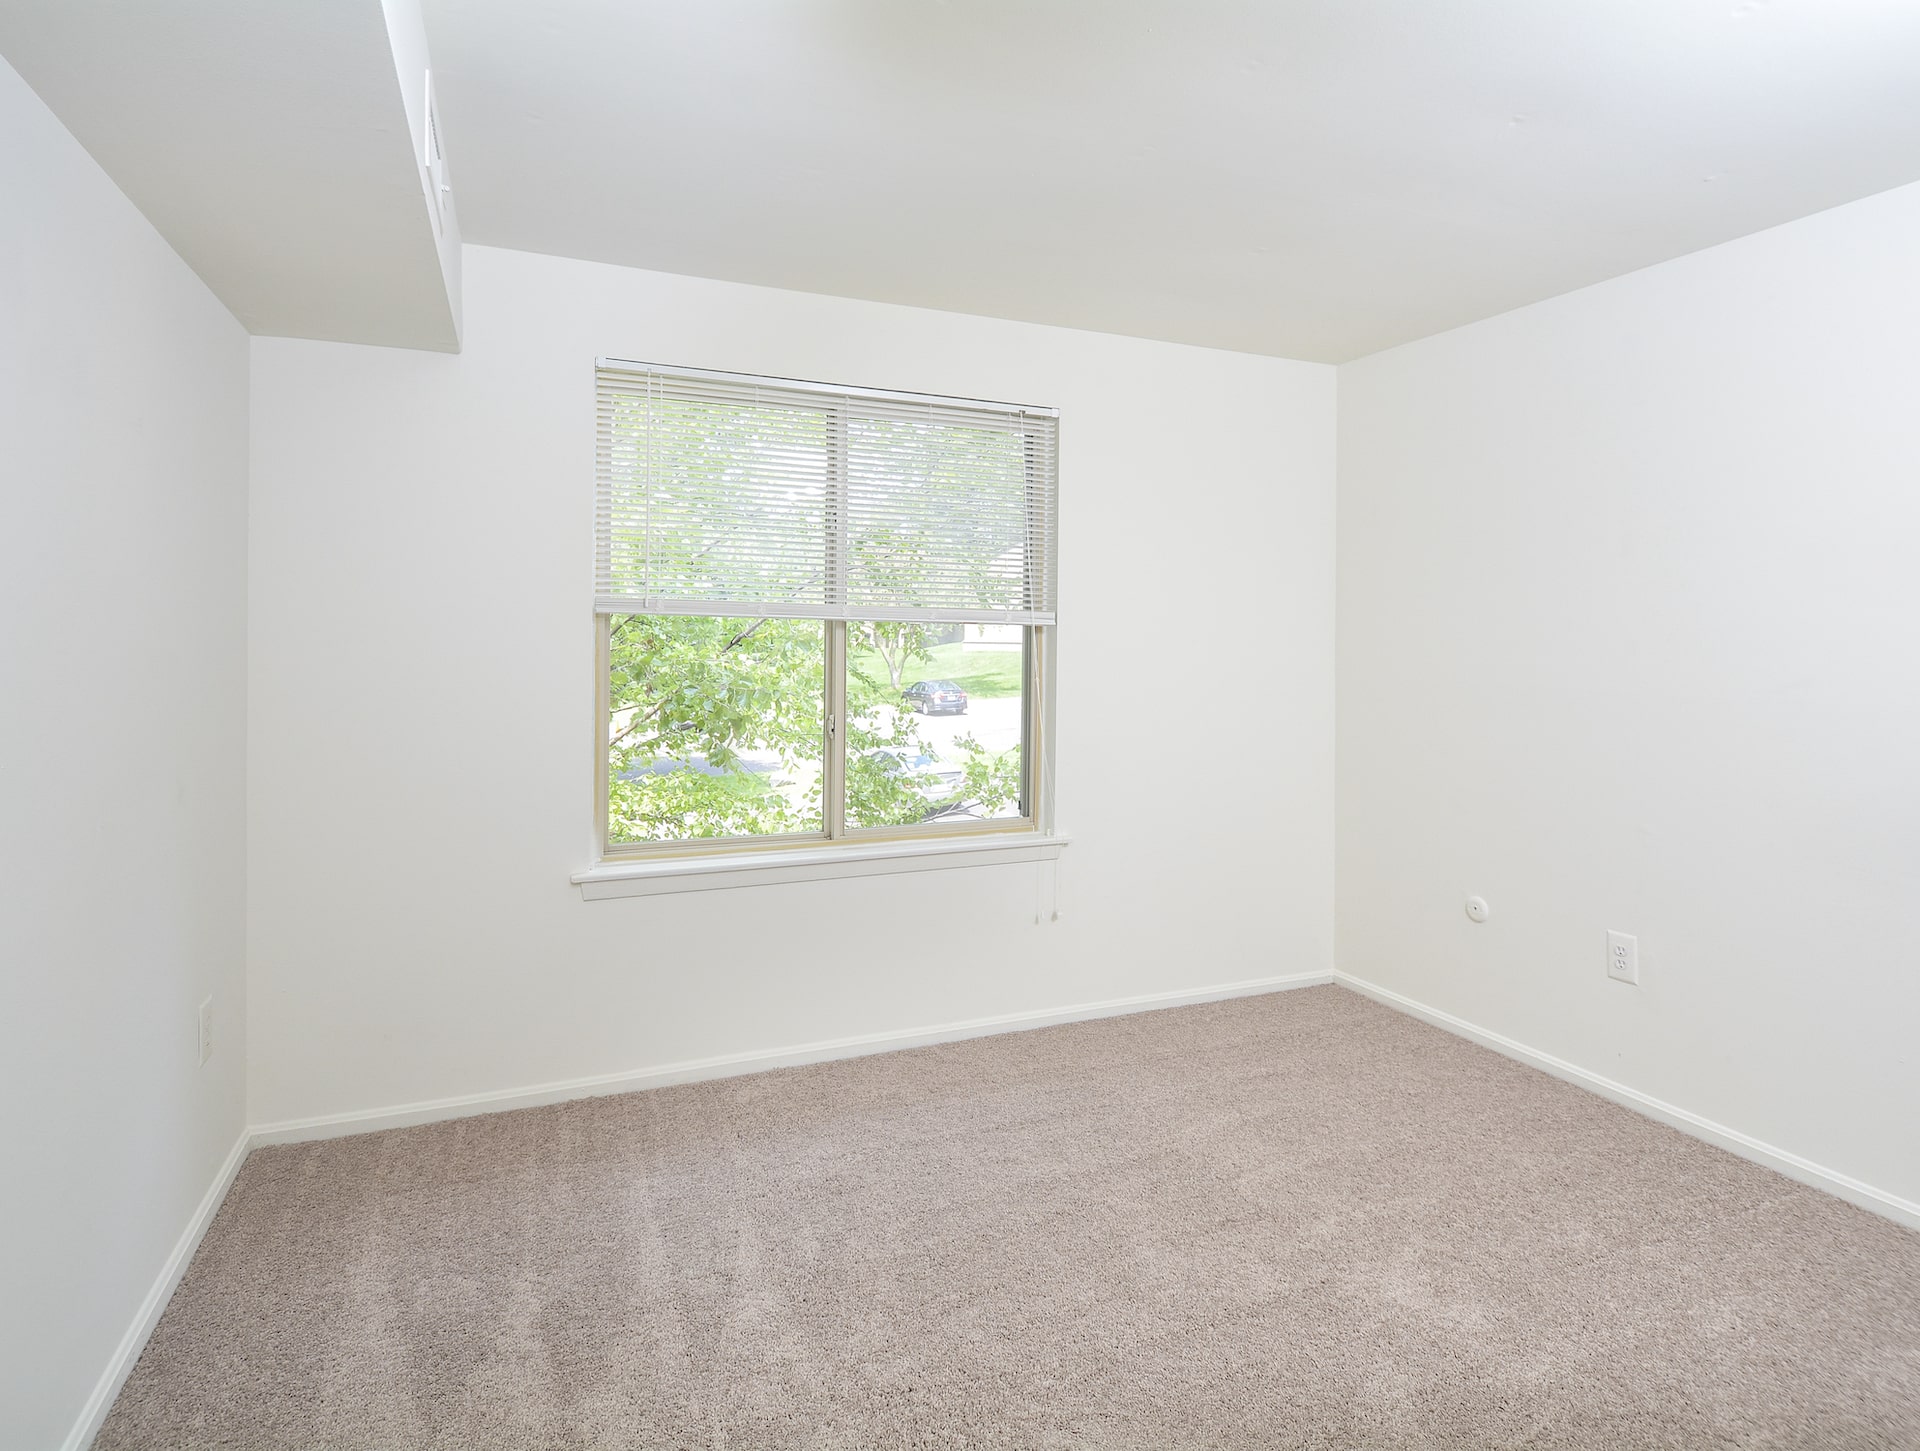 The living room area of an apartment unfurnished, fitted with carpet flooring, and a huge window